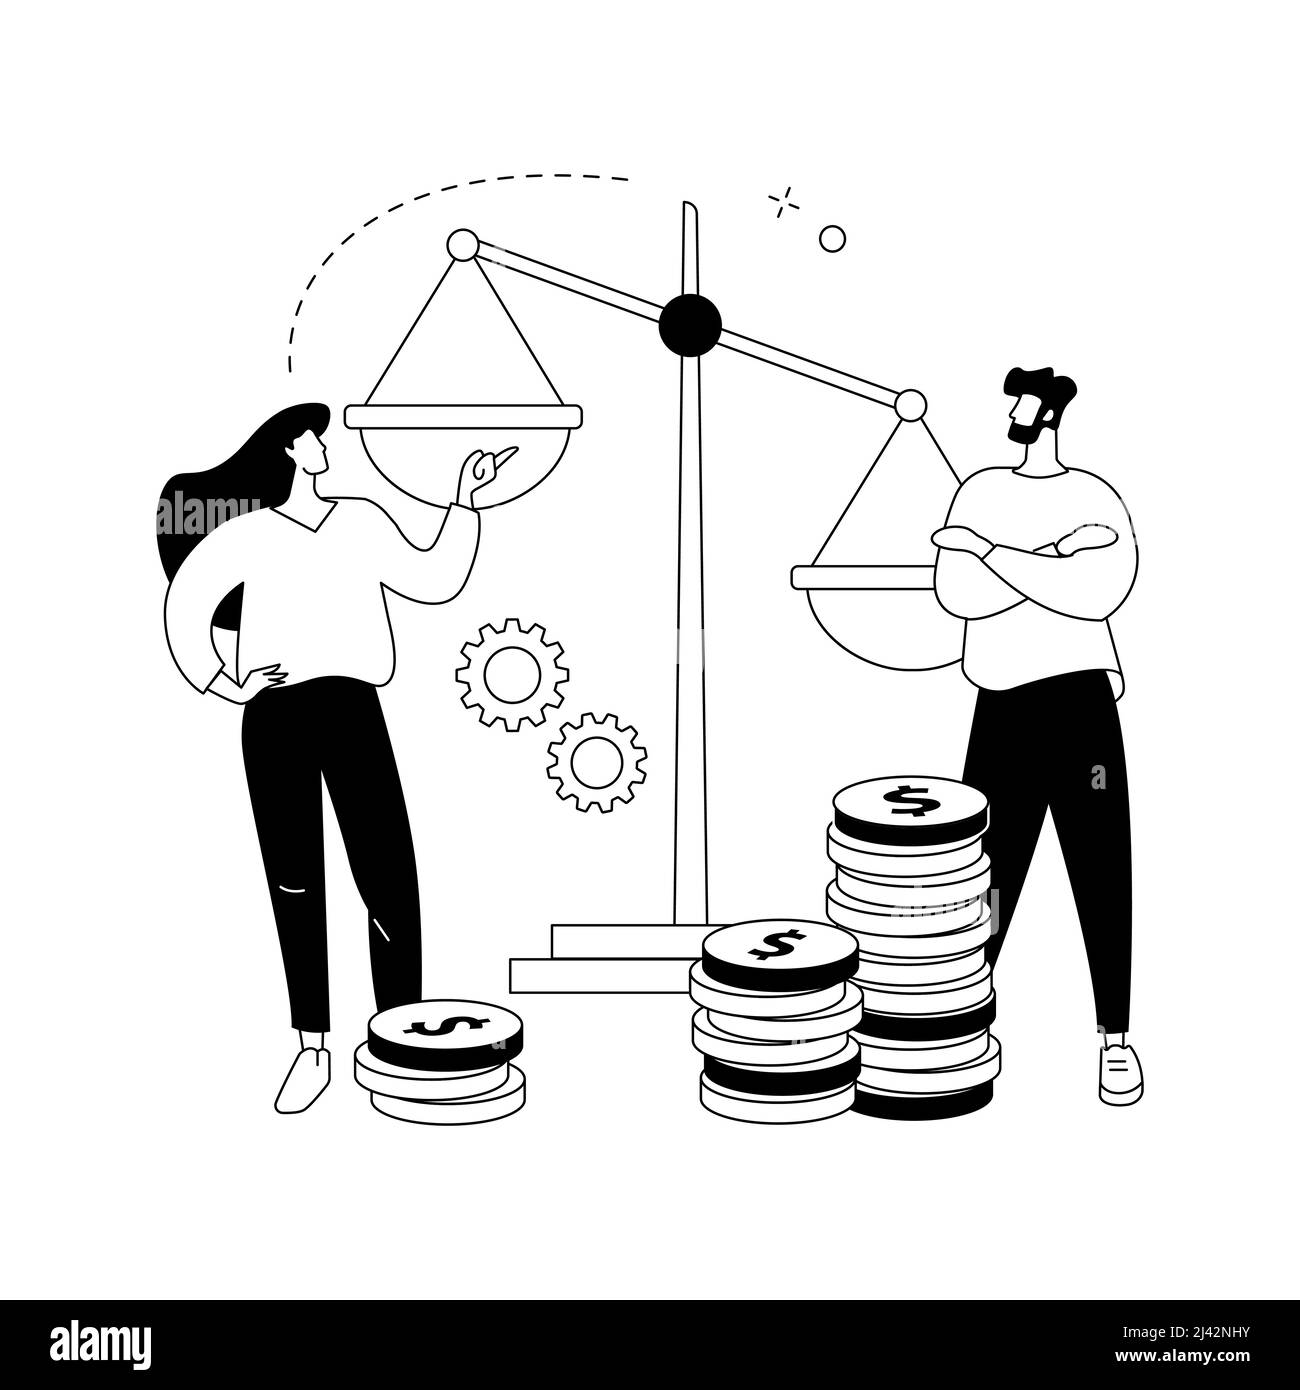 Gender discrimination abstract concept vector illustration. Sexism, gender roles and stereotypes, workplace inequality, skills and capabilities, women Stock Vector